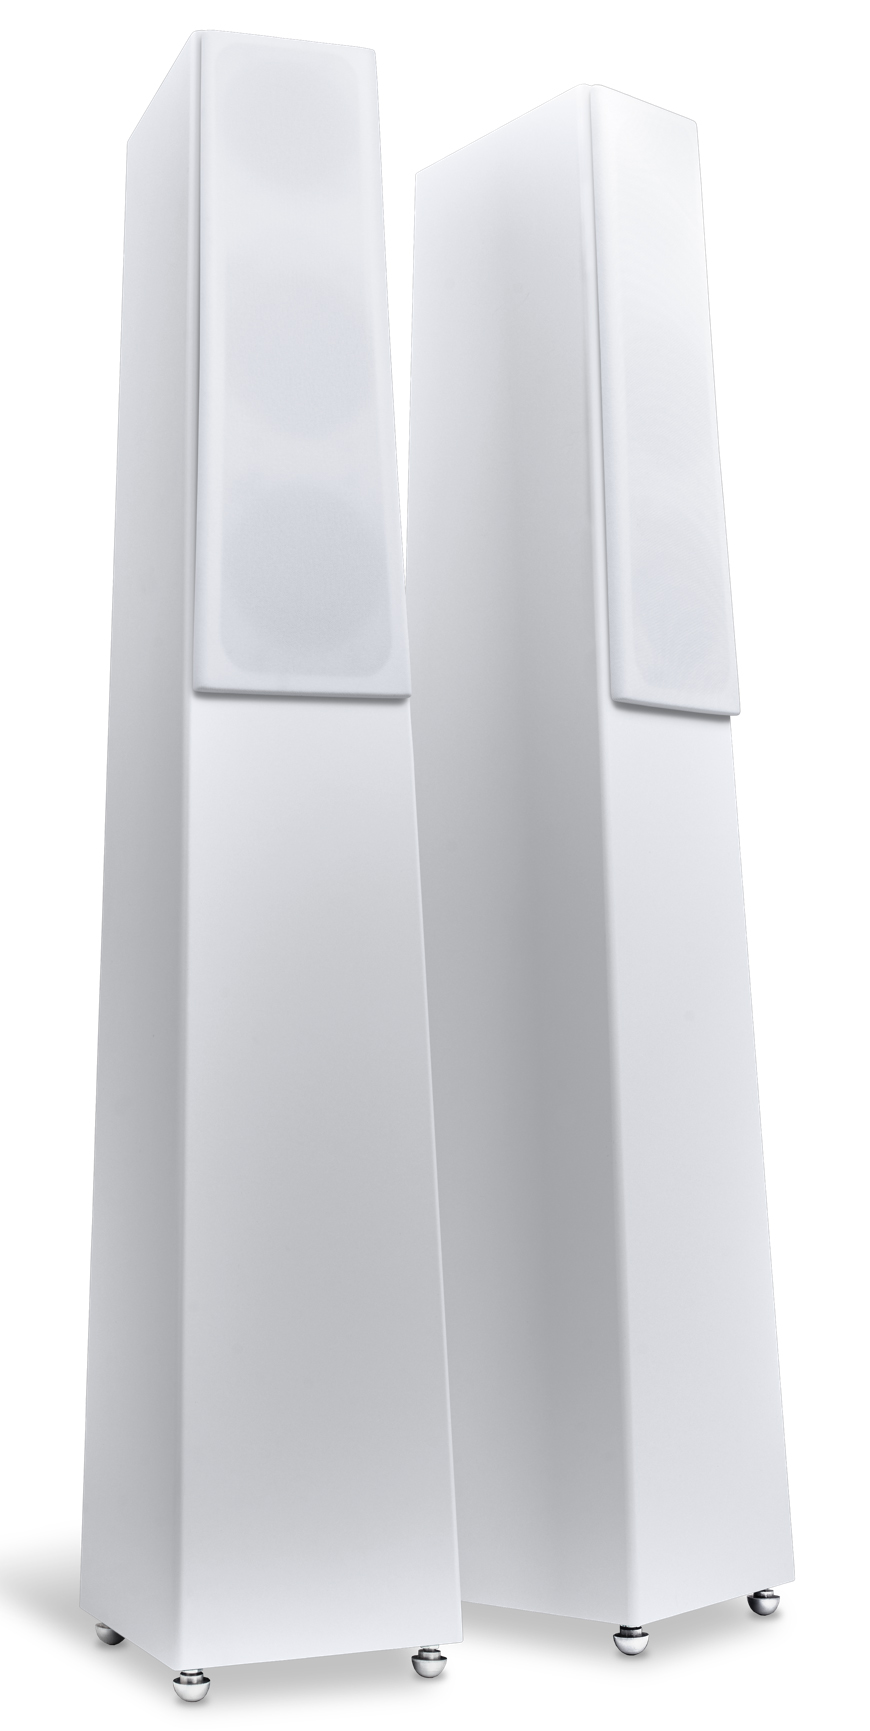 Totem Acoustic Tribe Tower satin white